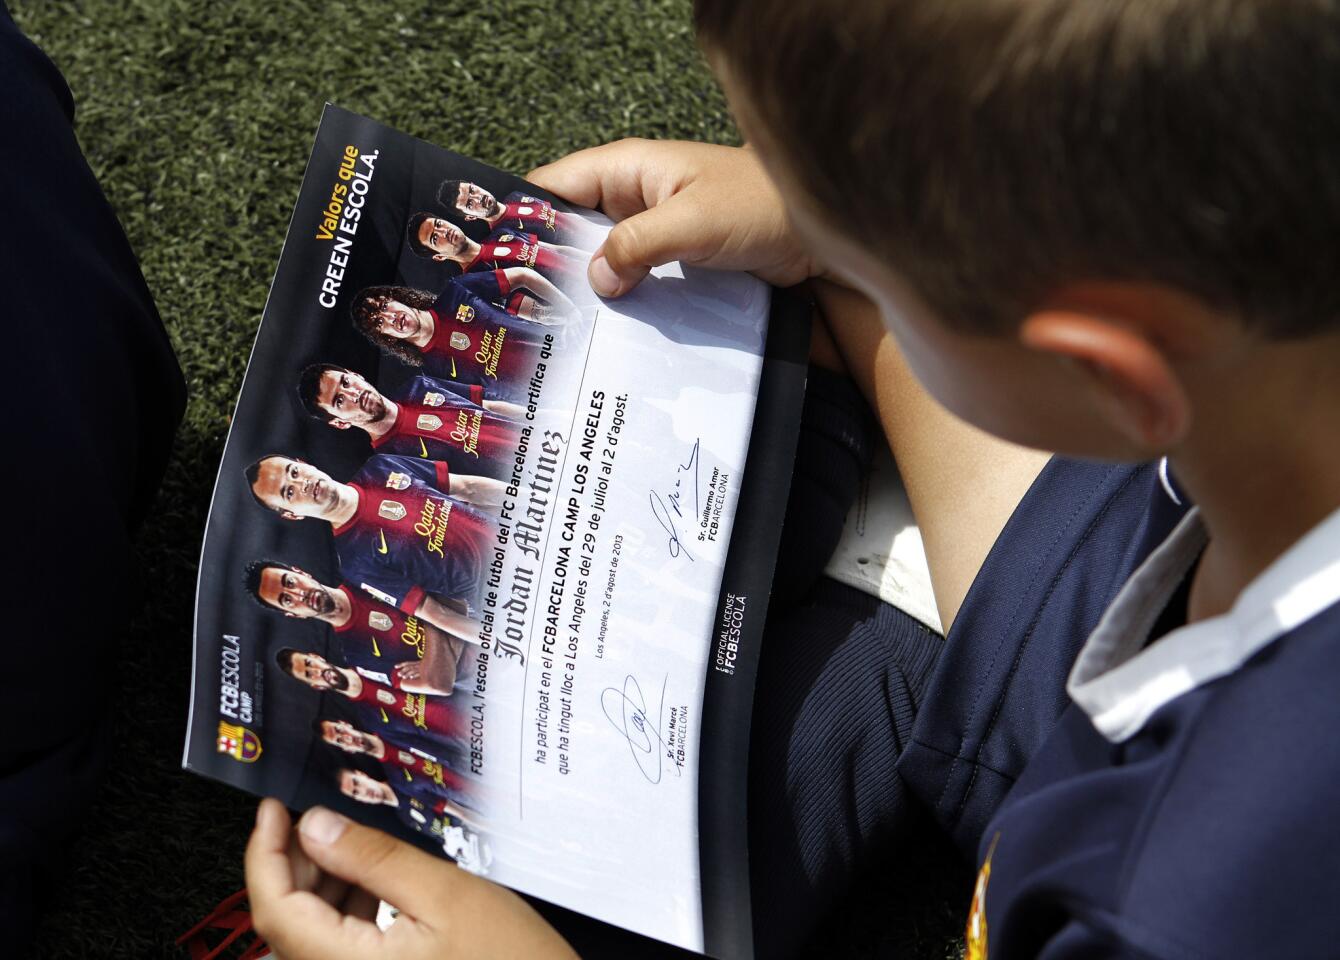 Photo Gallery: FC Barcelona soccer camp at Glendale Sports Complex